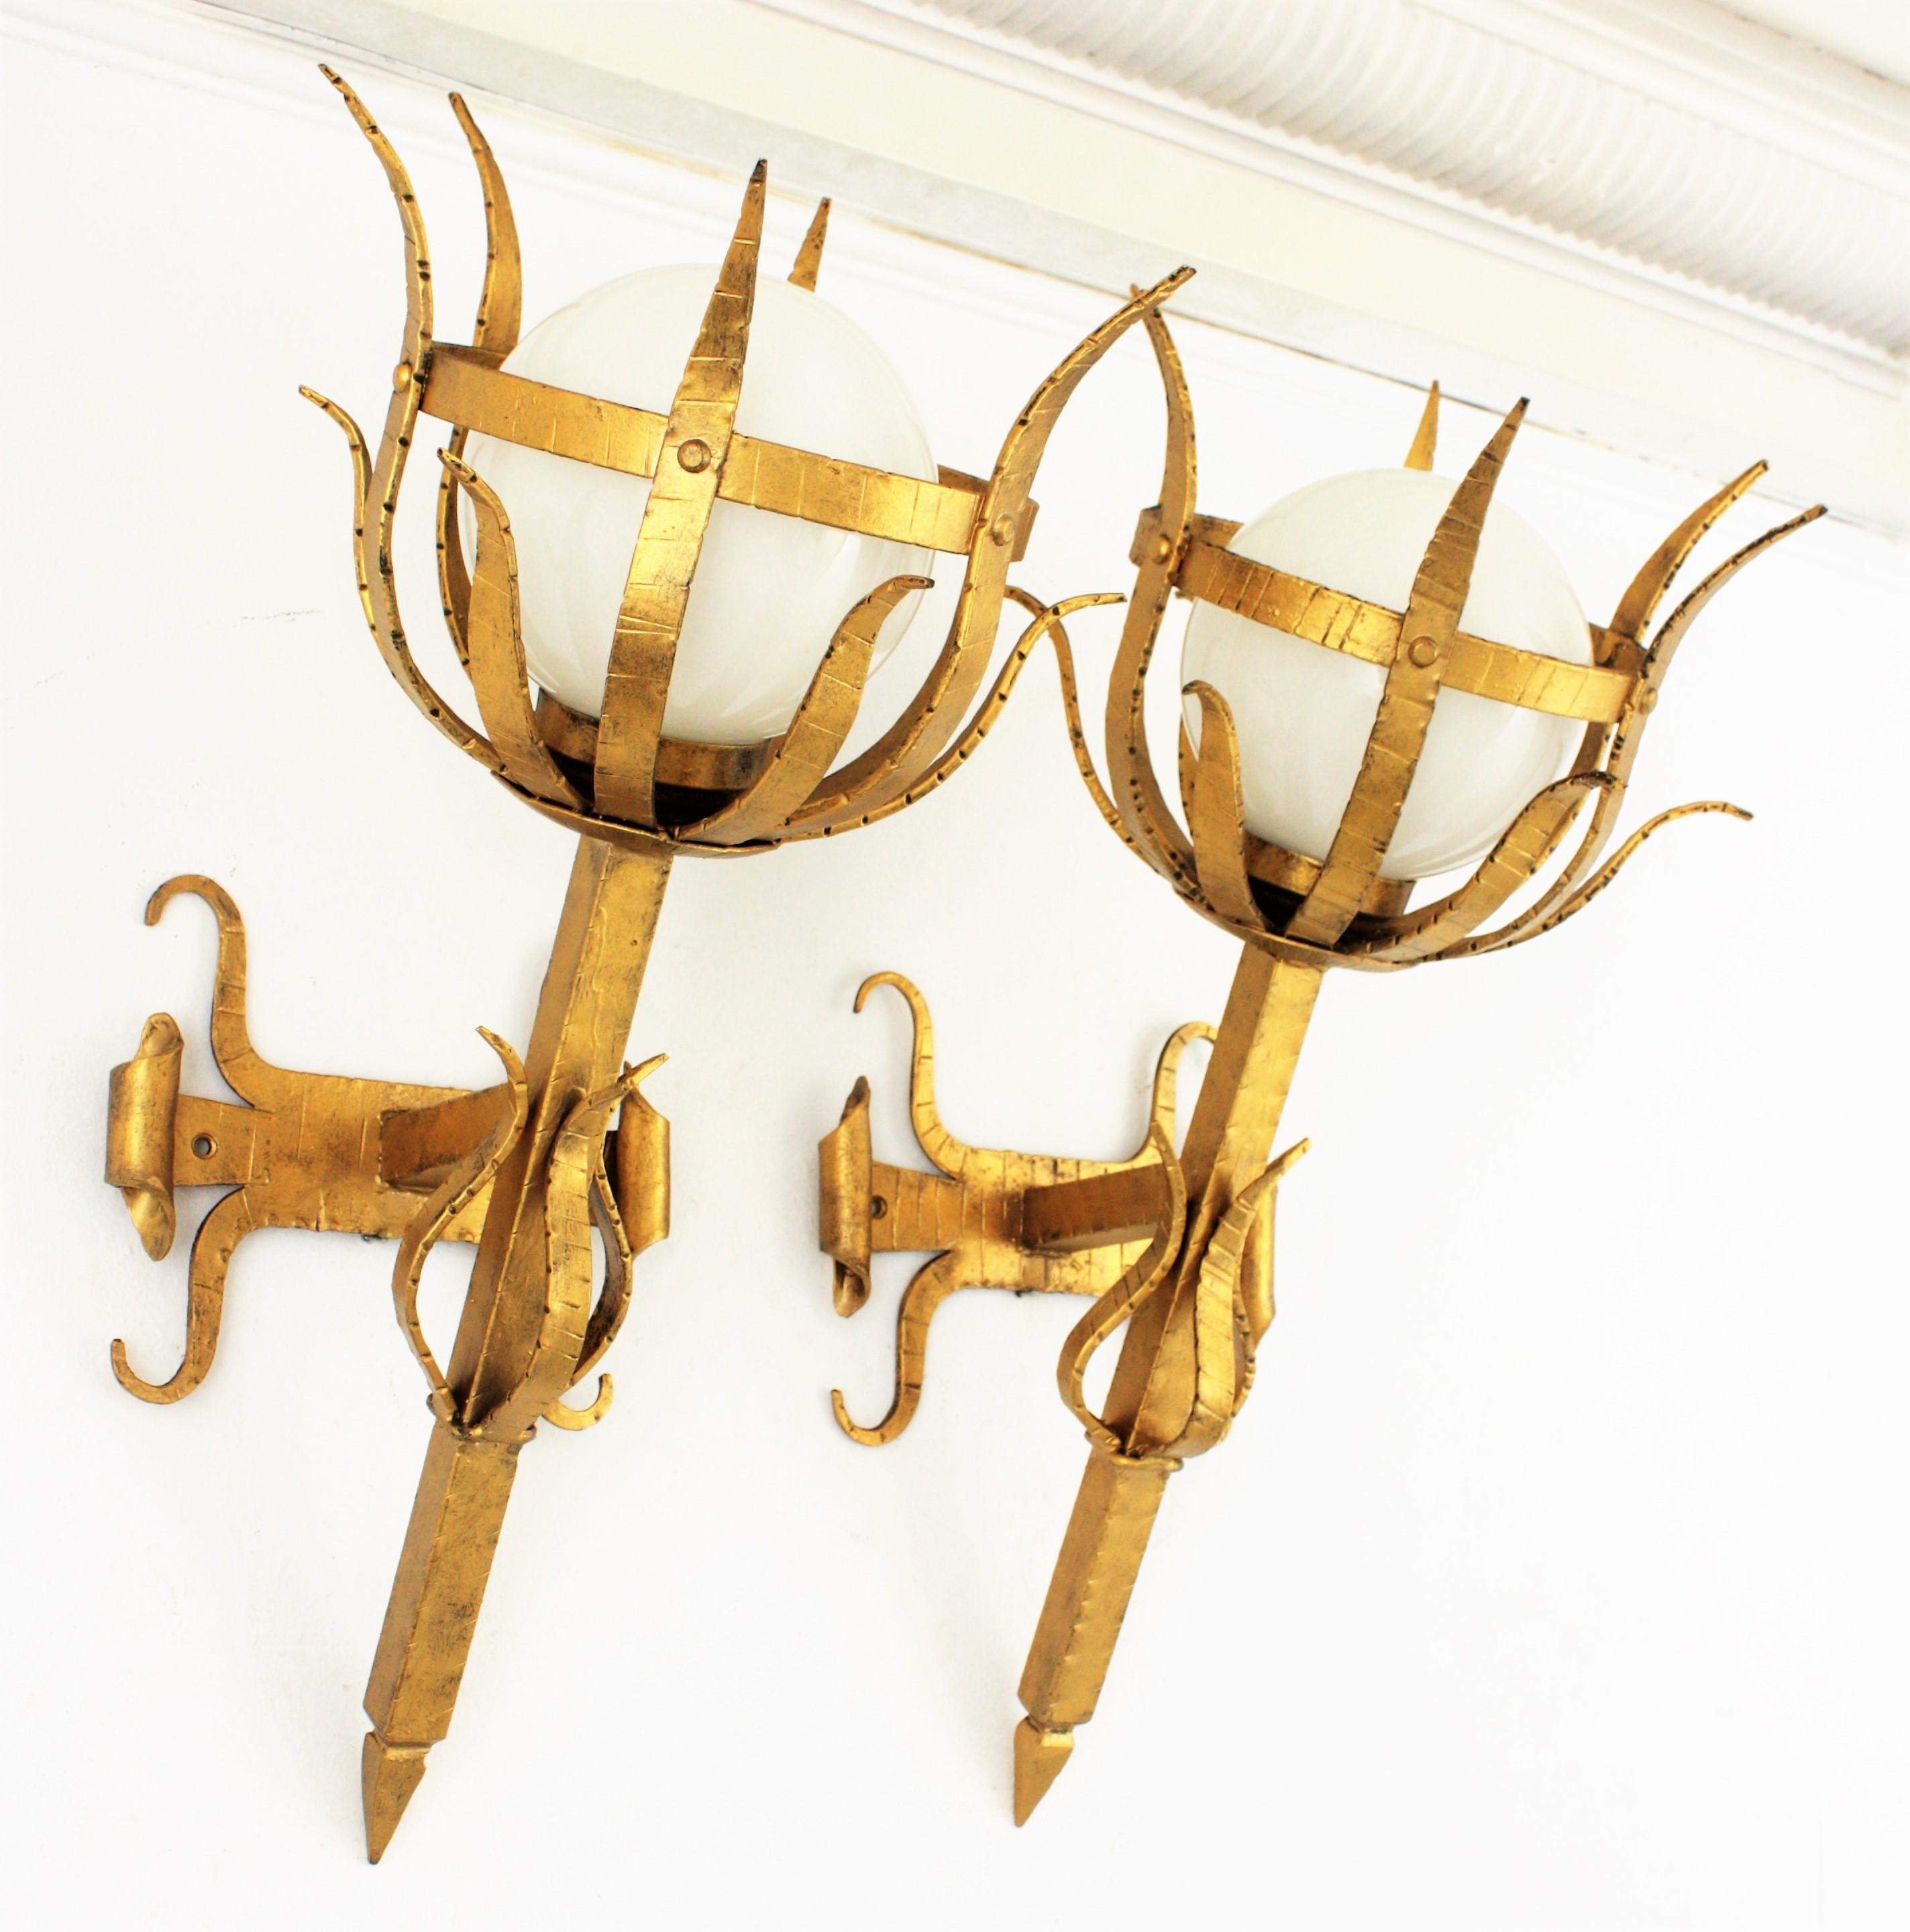 A huge hand-hammered iron Gothic style torch wall sconces with opaline glass globe shades and gilt patina finish,
Spain, 1950s.
This beautiful pair of wall lights can be placed indoor or outdoor (wired for both uses).